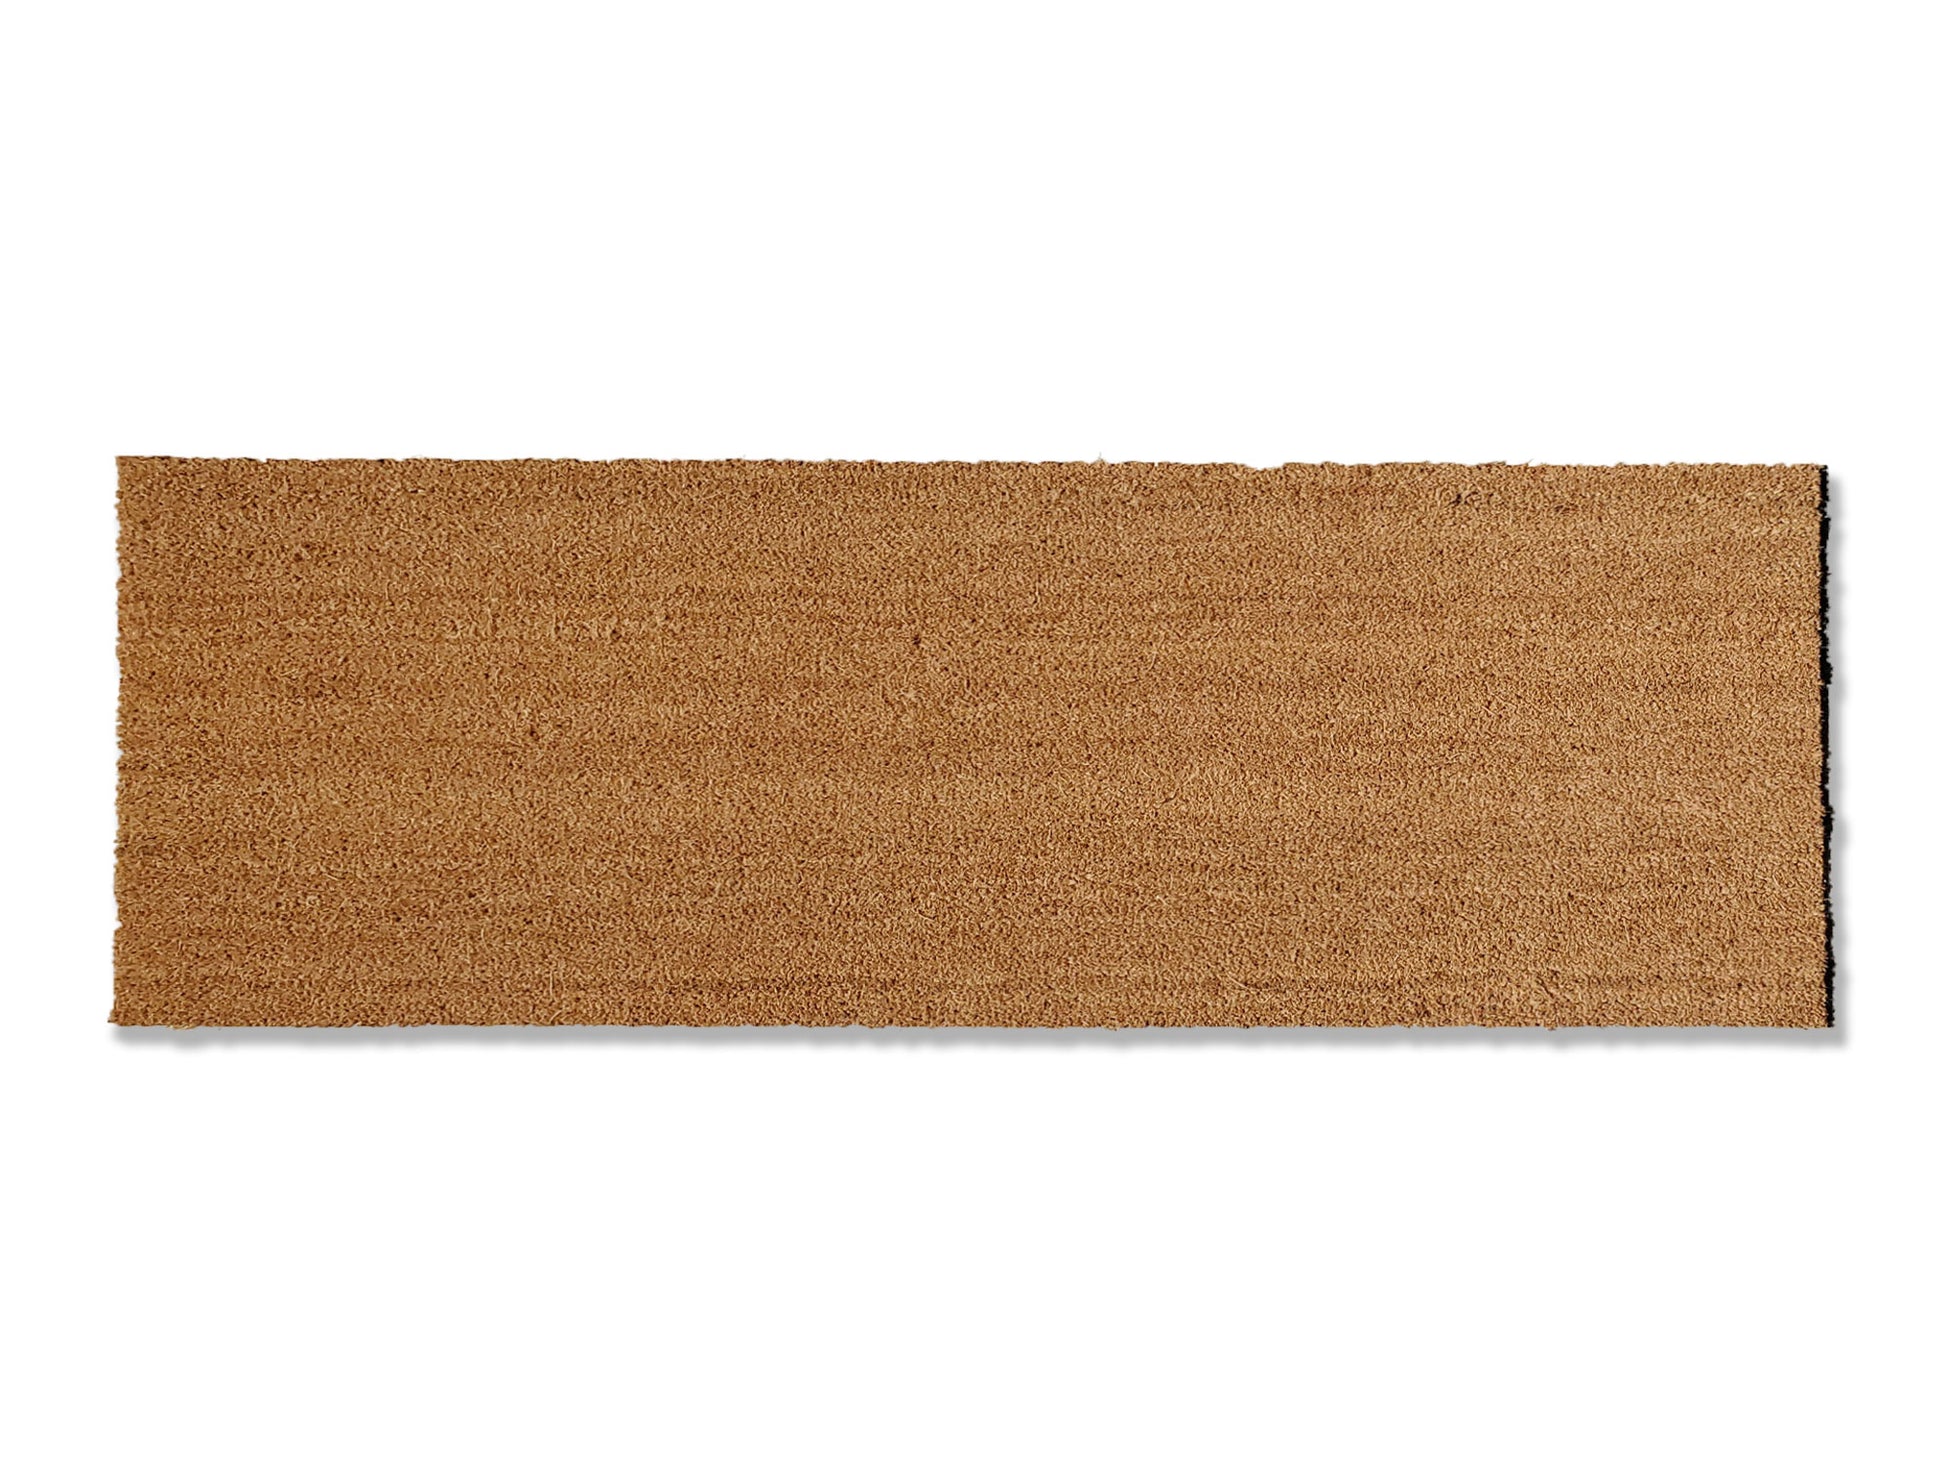 Plain Coir Doormat - Available in multiple sizes, this doormat is highly effective at trapping dirt. A versatile and practical addition to your entryway.